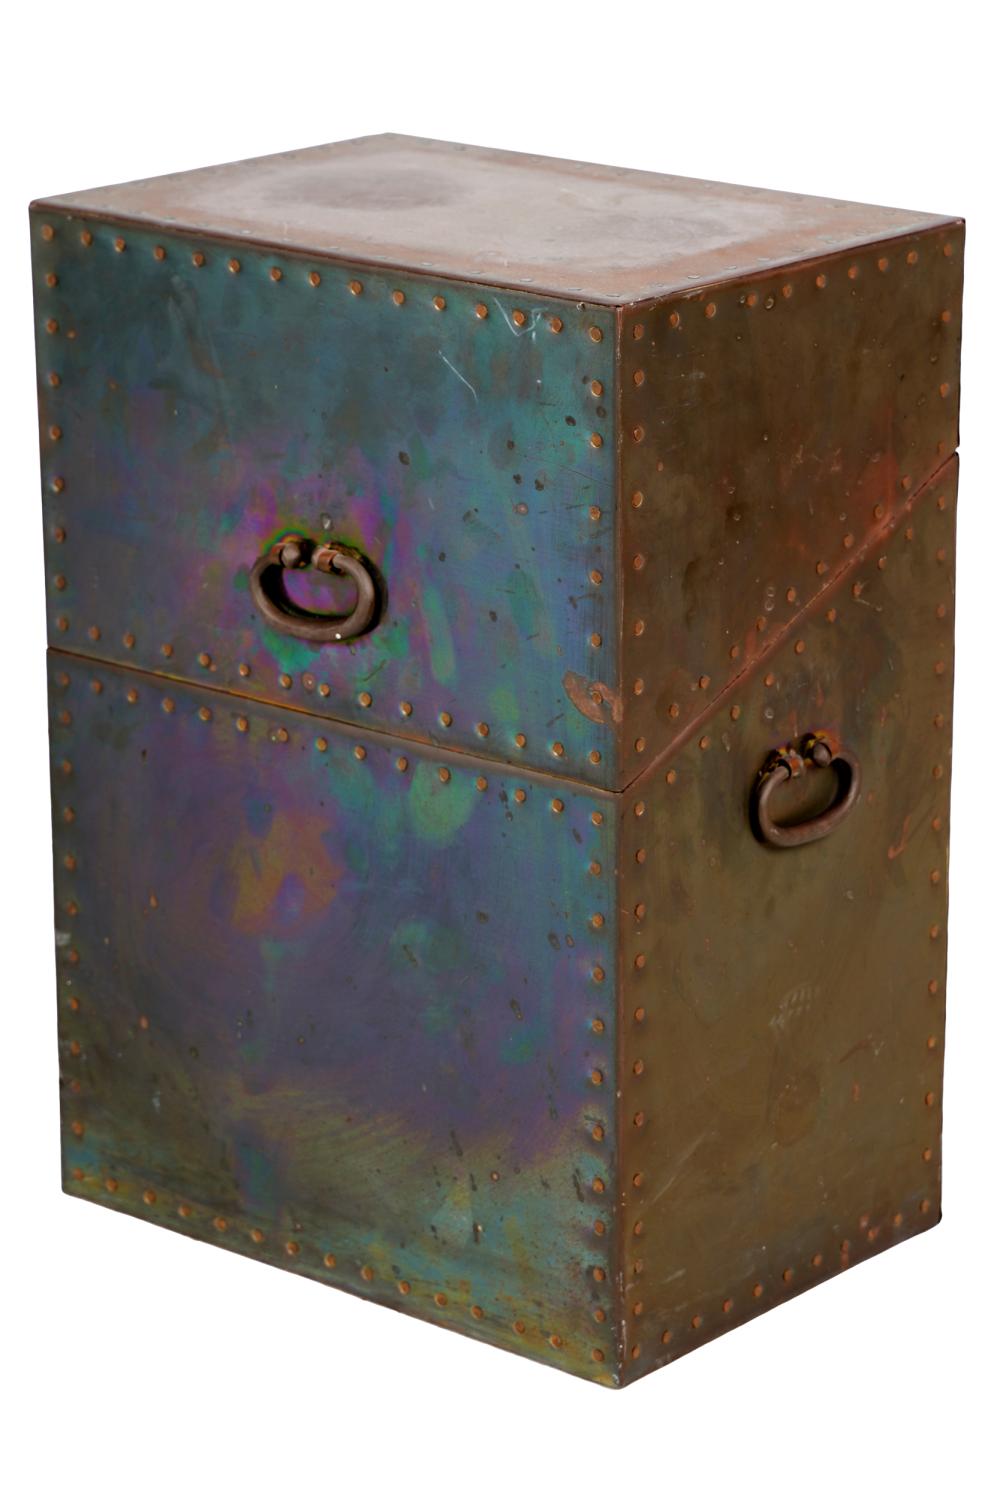 BRASS-CLAD BOXthe hinged lid concealing